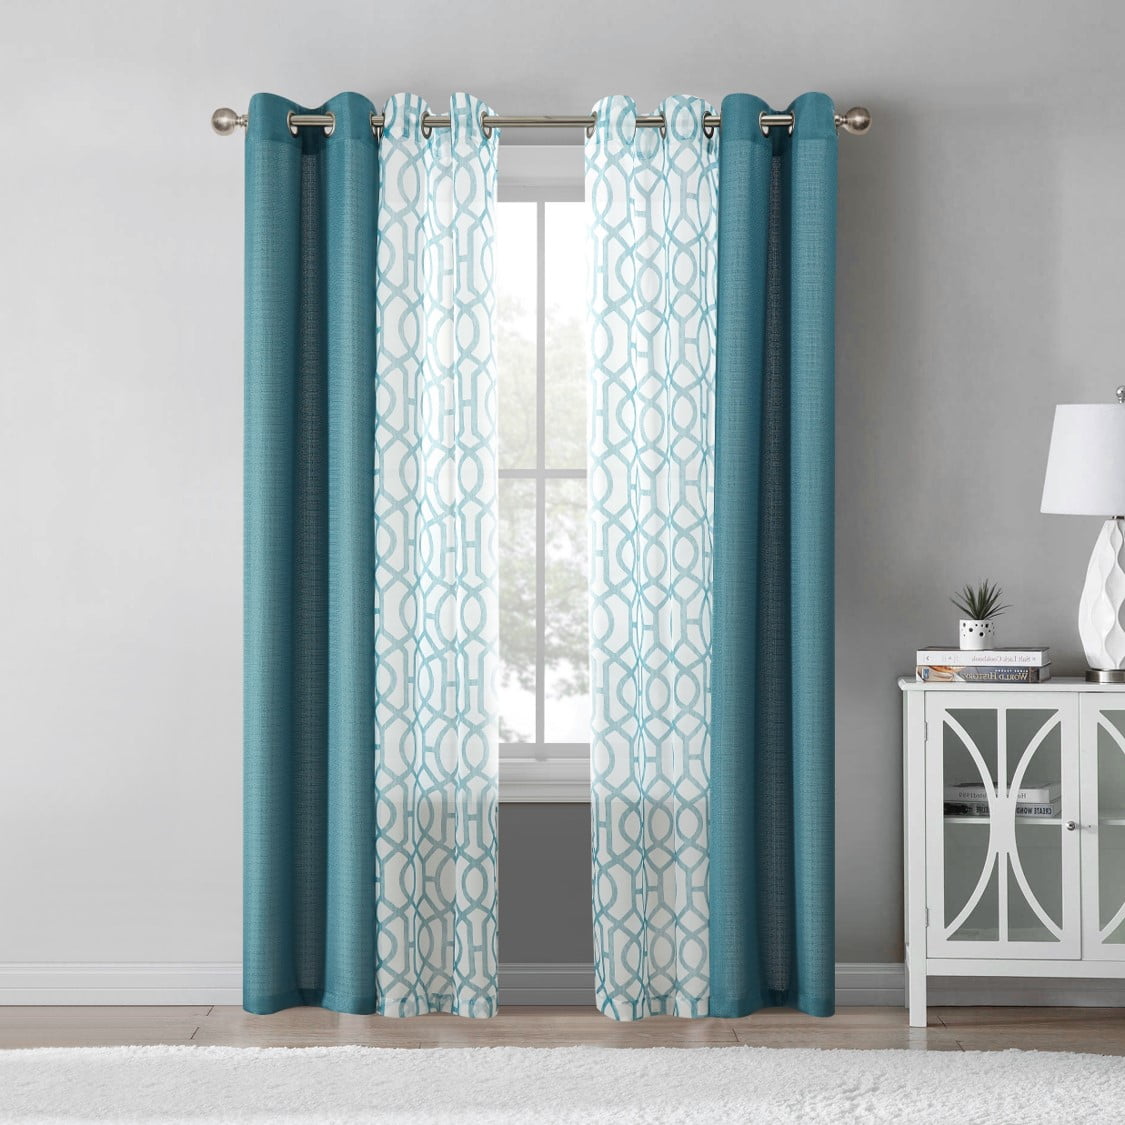 Mainstays Kingswood 4 Piece Curtain Panel Set, 27.5x84, Pacifica Green